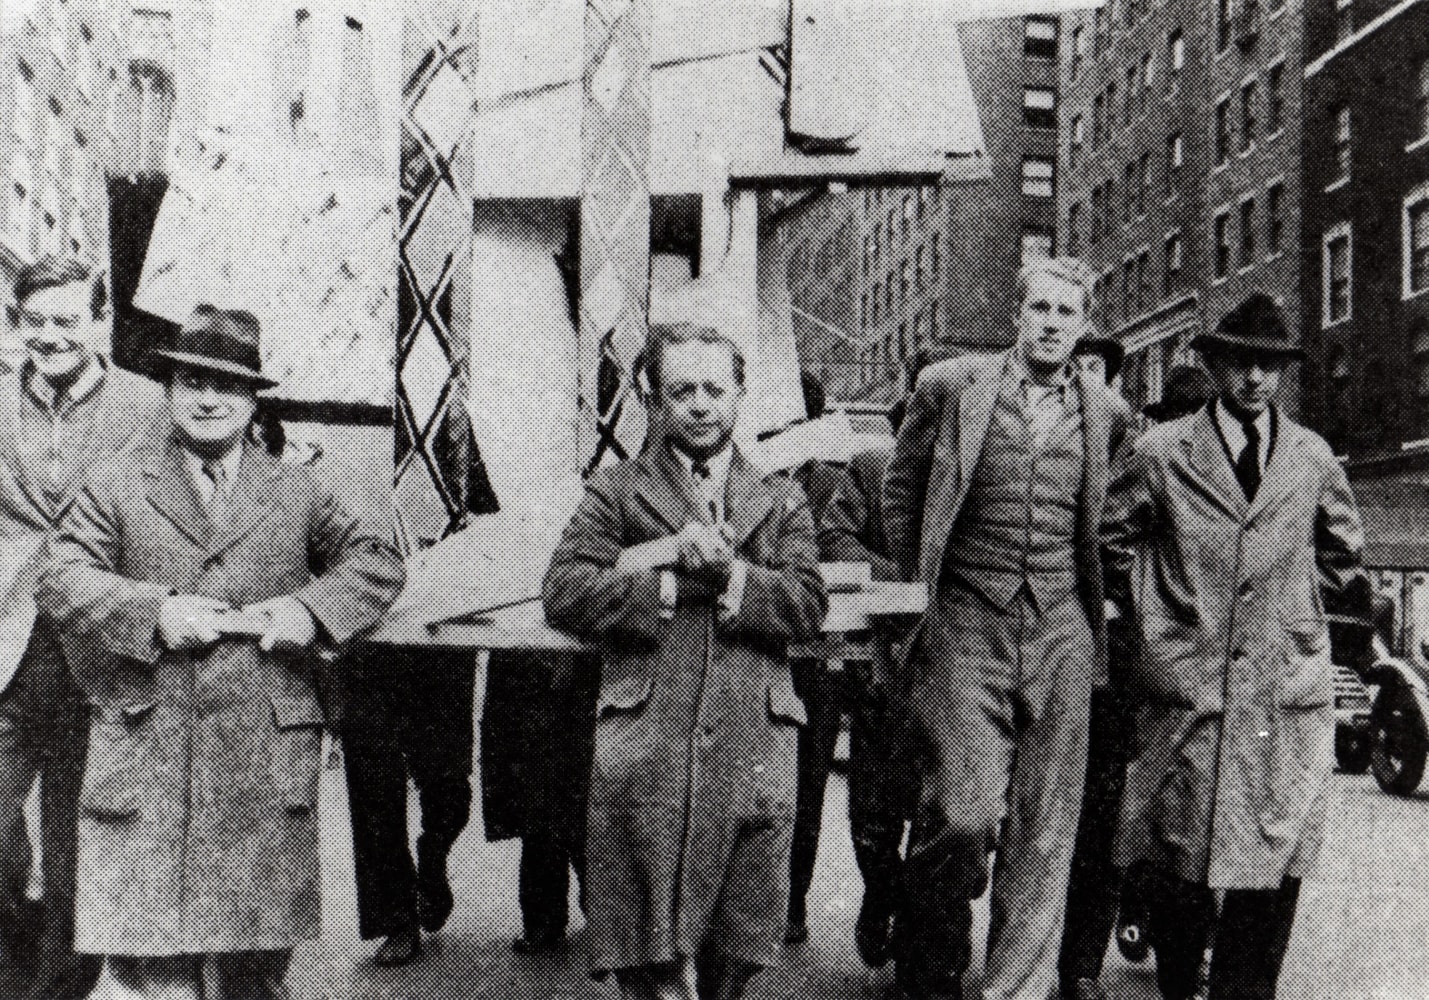 Five men walking down a New York City street holding a float for a parade